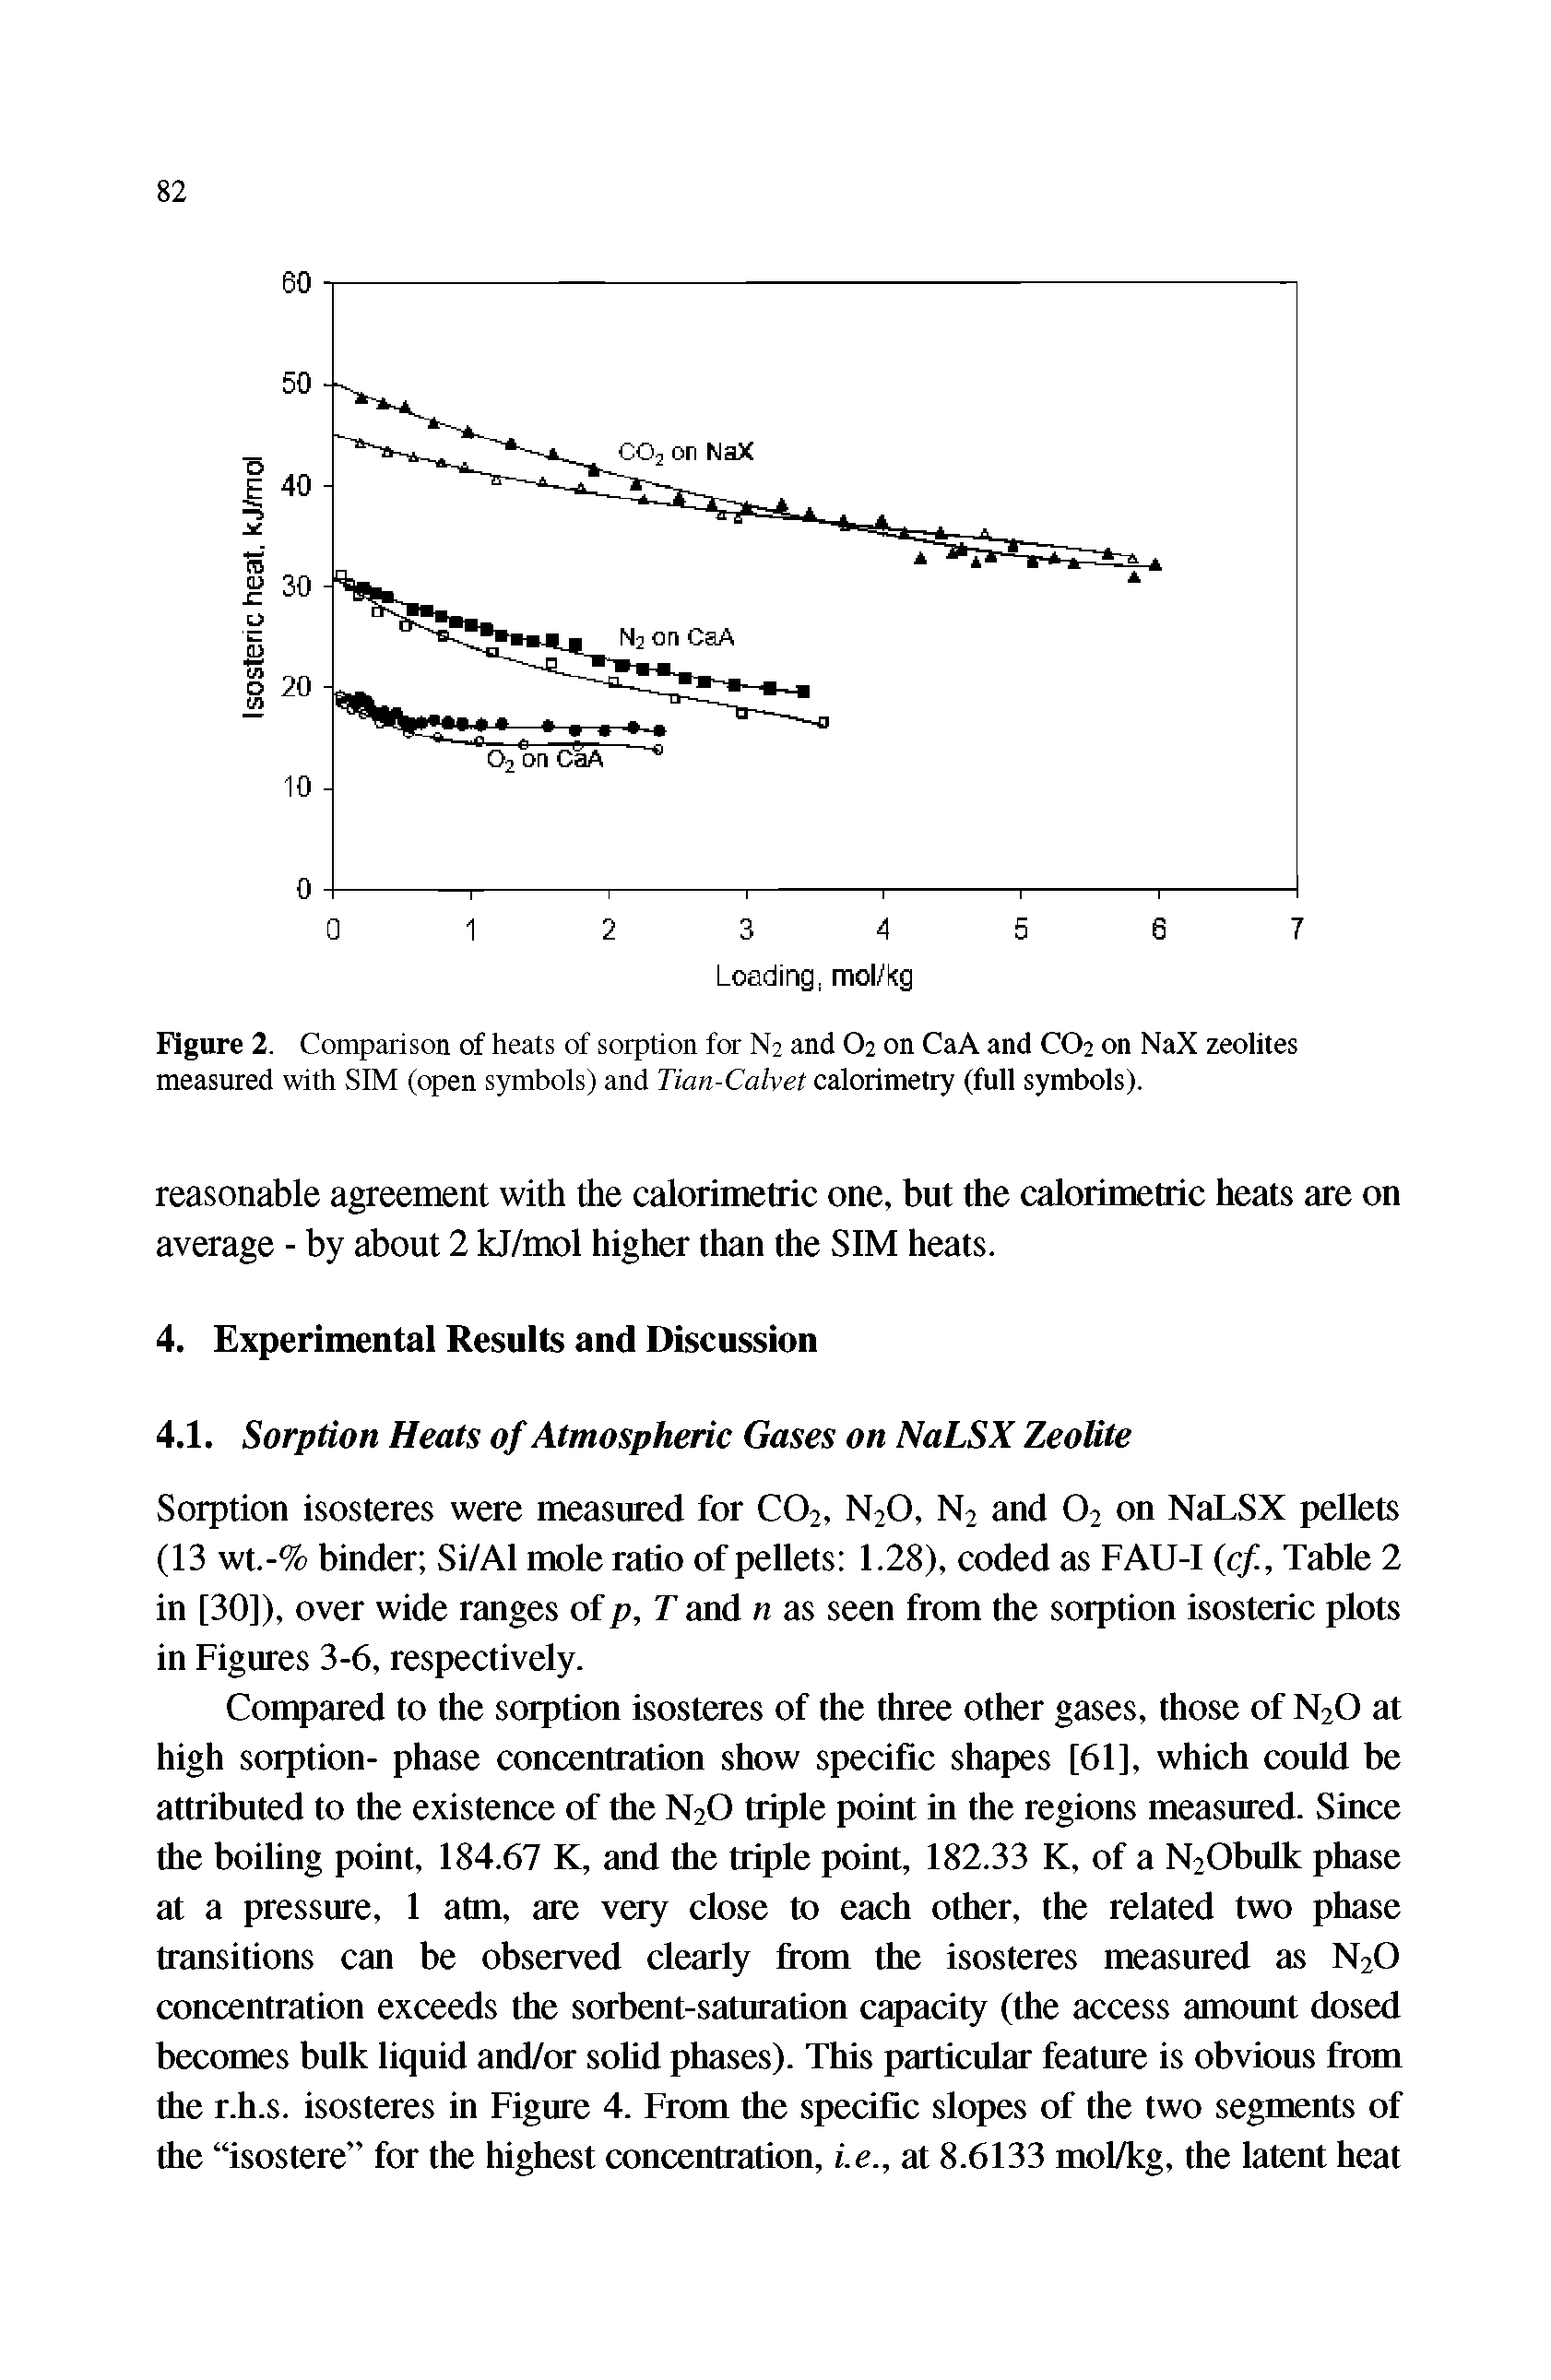 Figure 2. Comparison of heats of sorption for N2 and O2 on CaA and CO2 on NaX zeolites measured with SIM (open symbols) and Tian-Calvet calorimetry (full symbols).